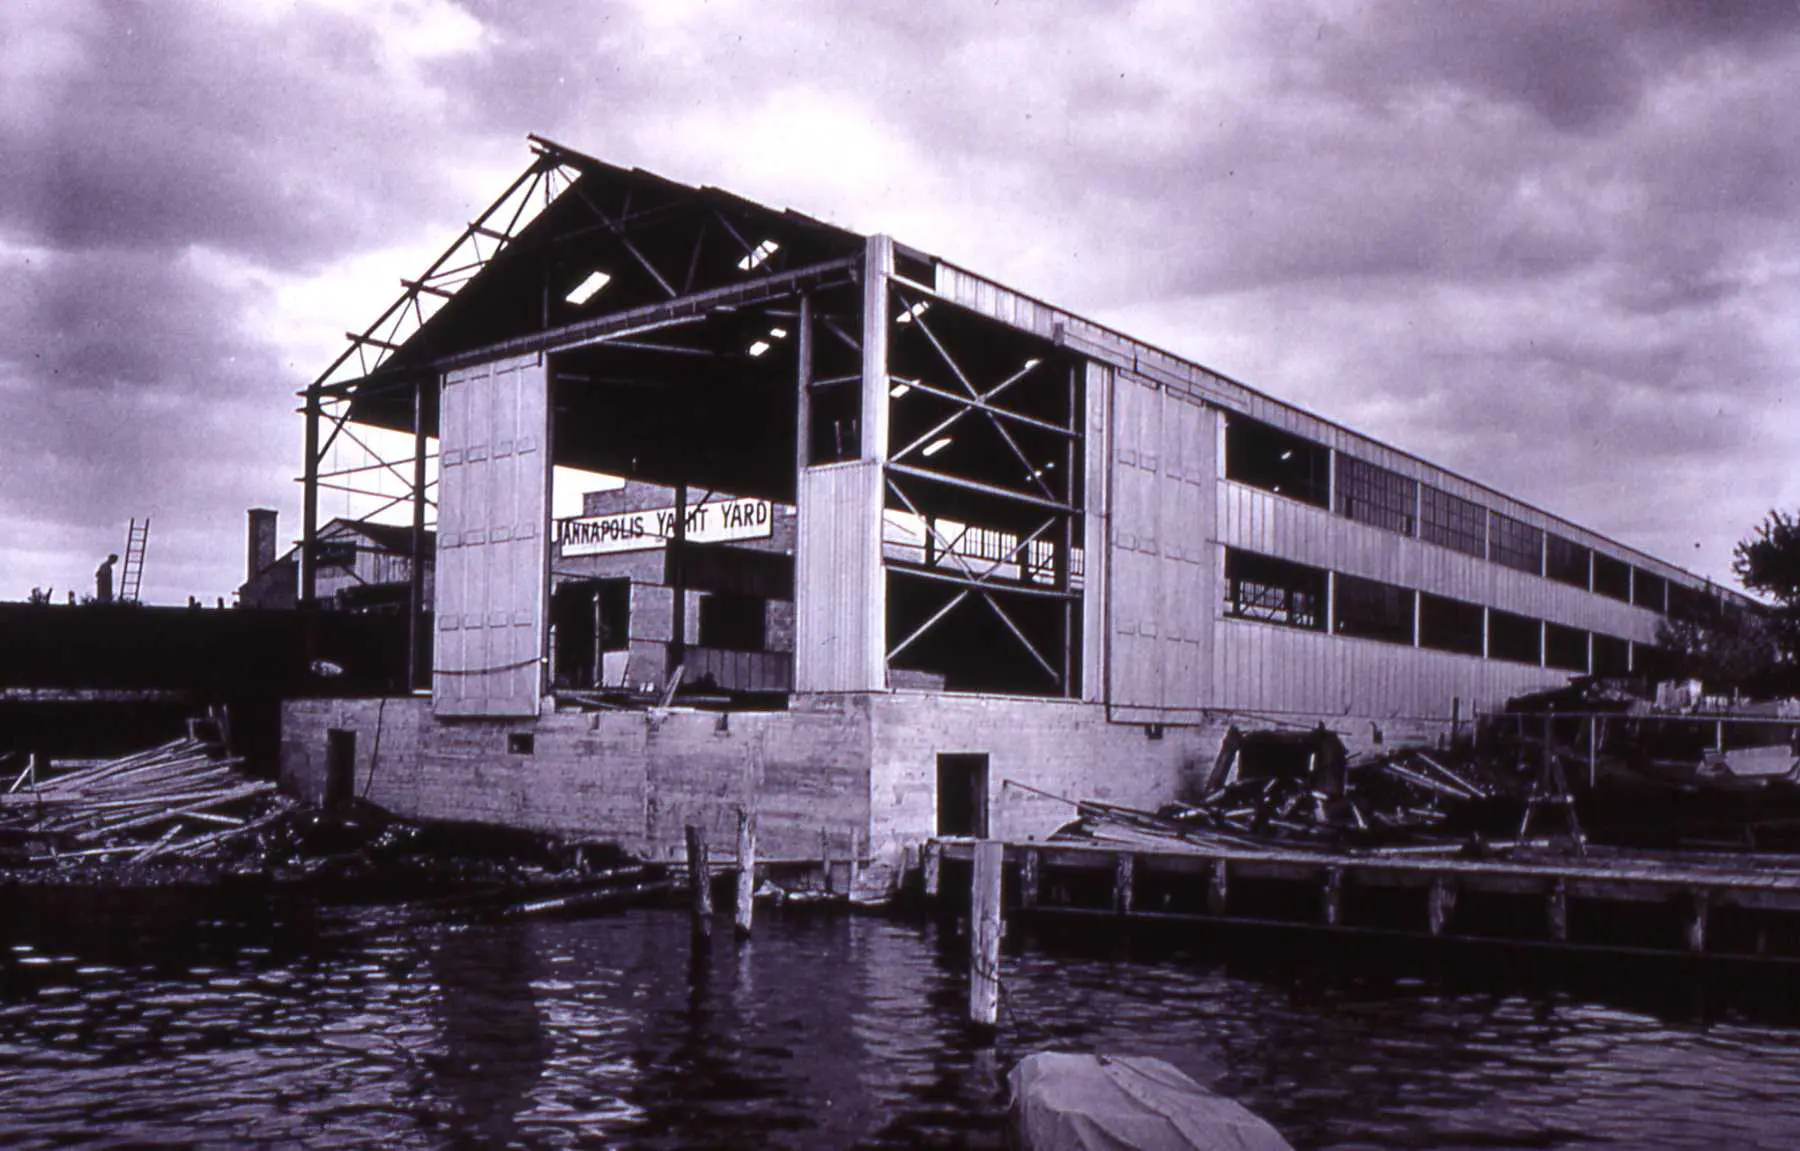 Construction photo of "The Big Shed" - a large structure created circa 1942 to house boat building for the World Wars PT boats and Trumpy Yachts in Annapolis.